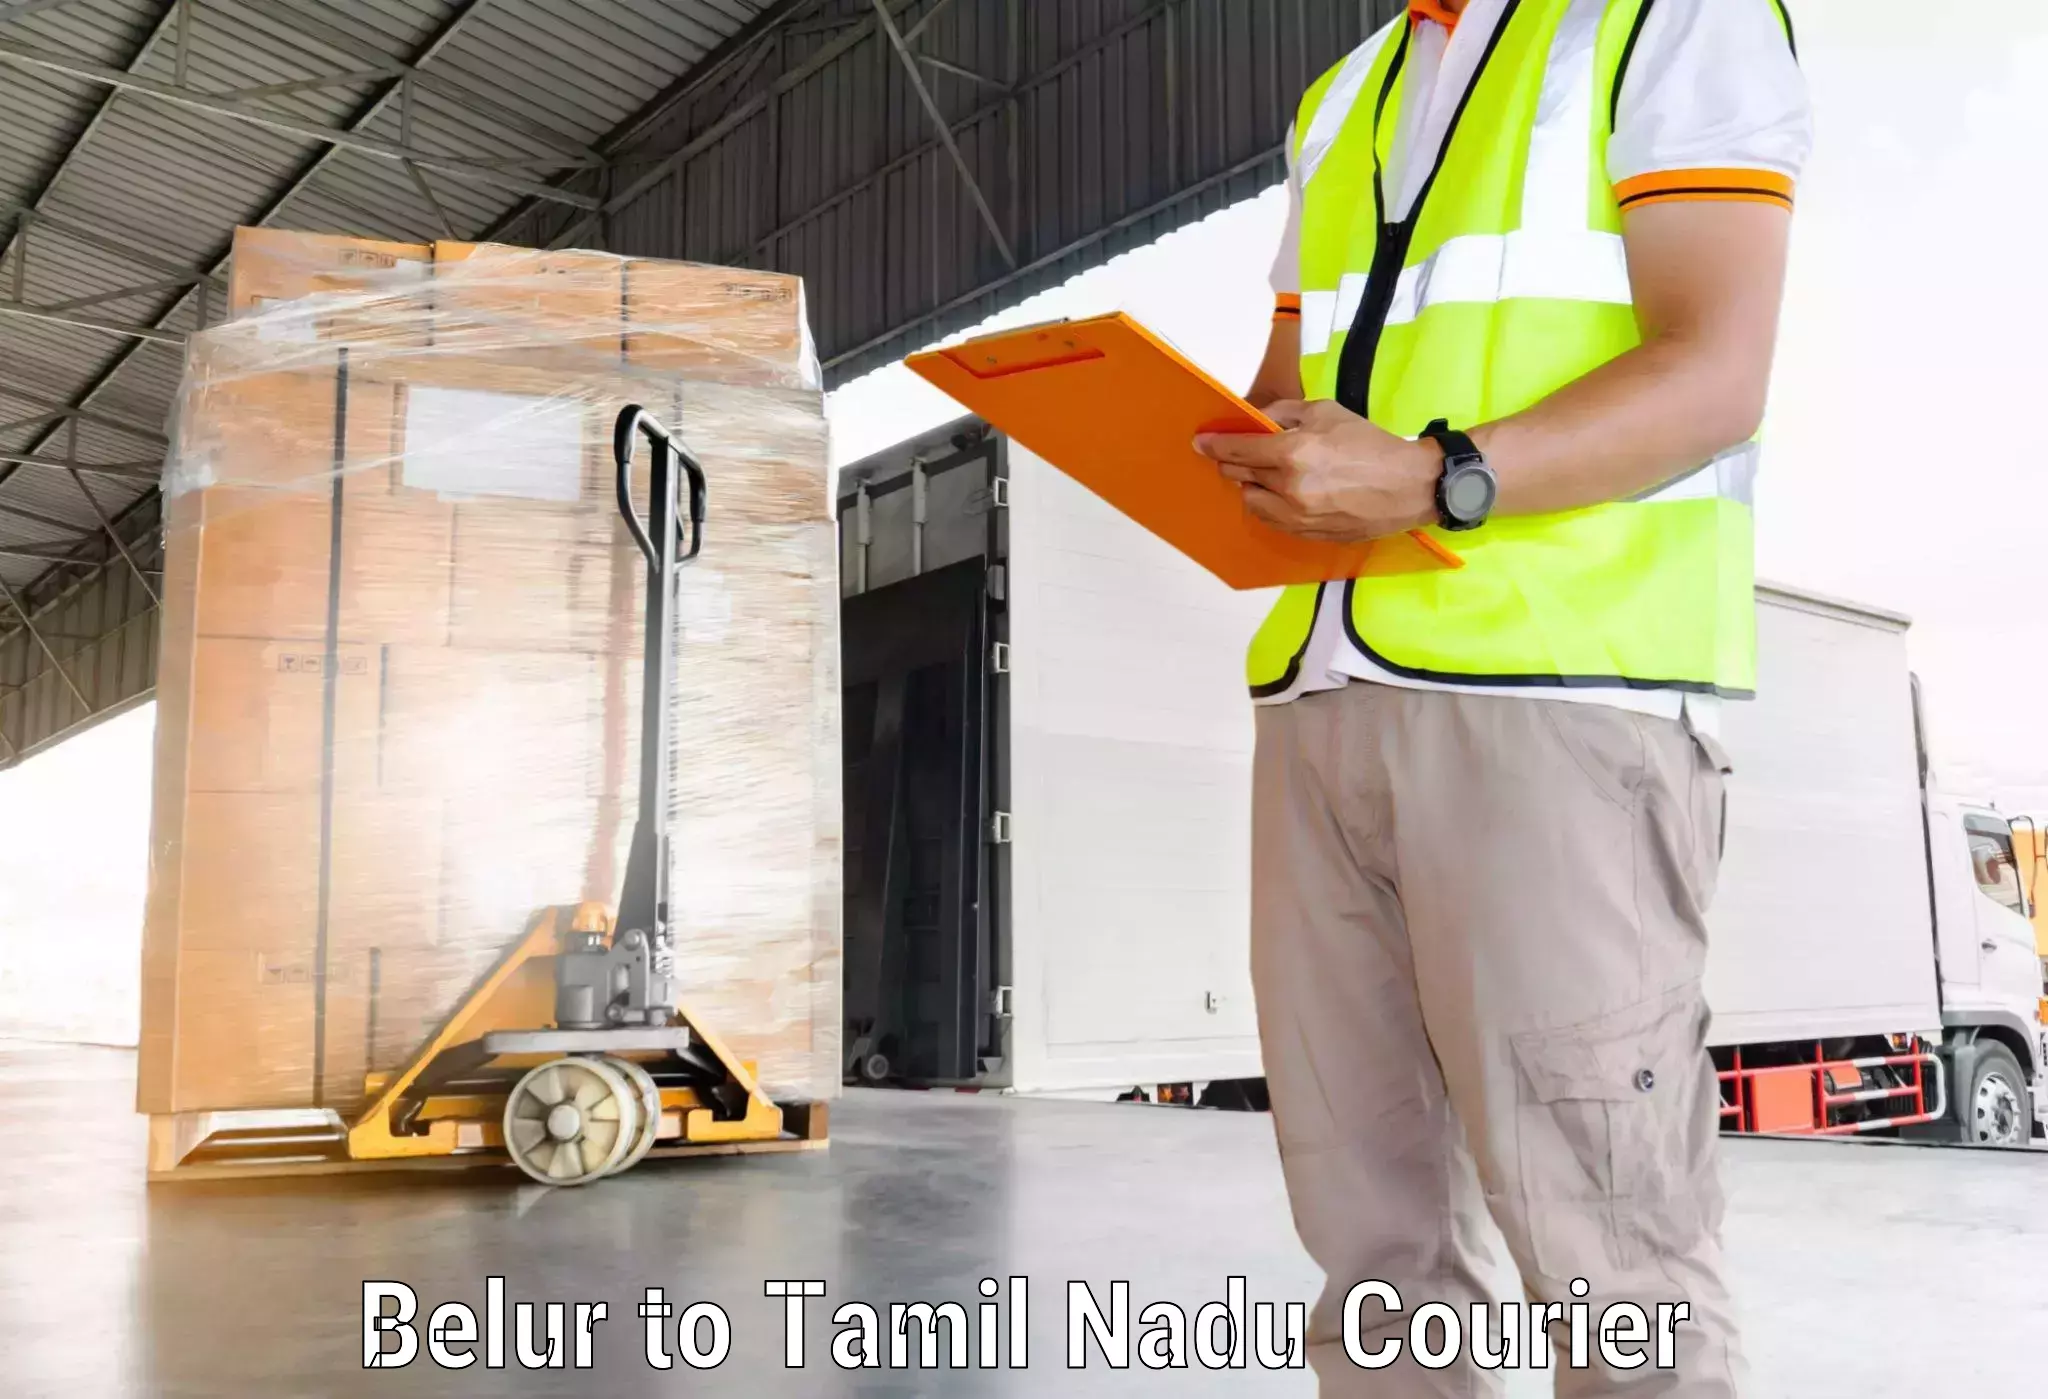 Quick courier services in Belur to Ennore Port Chennai